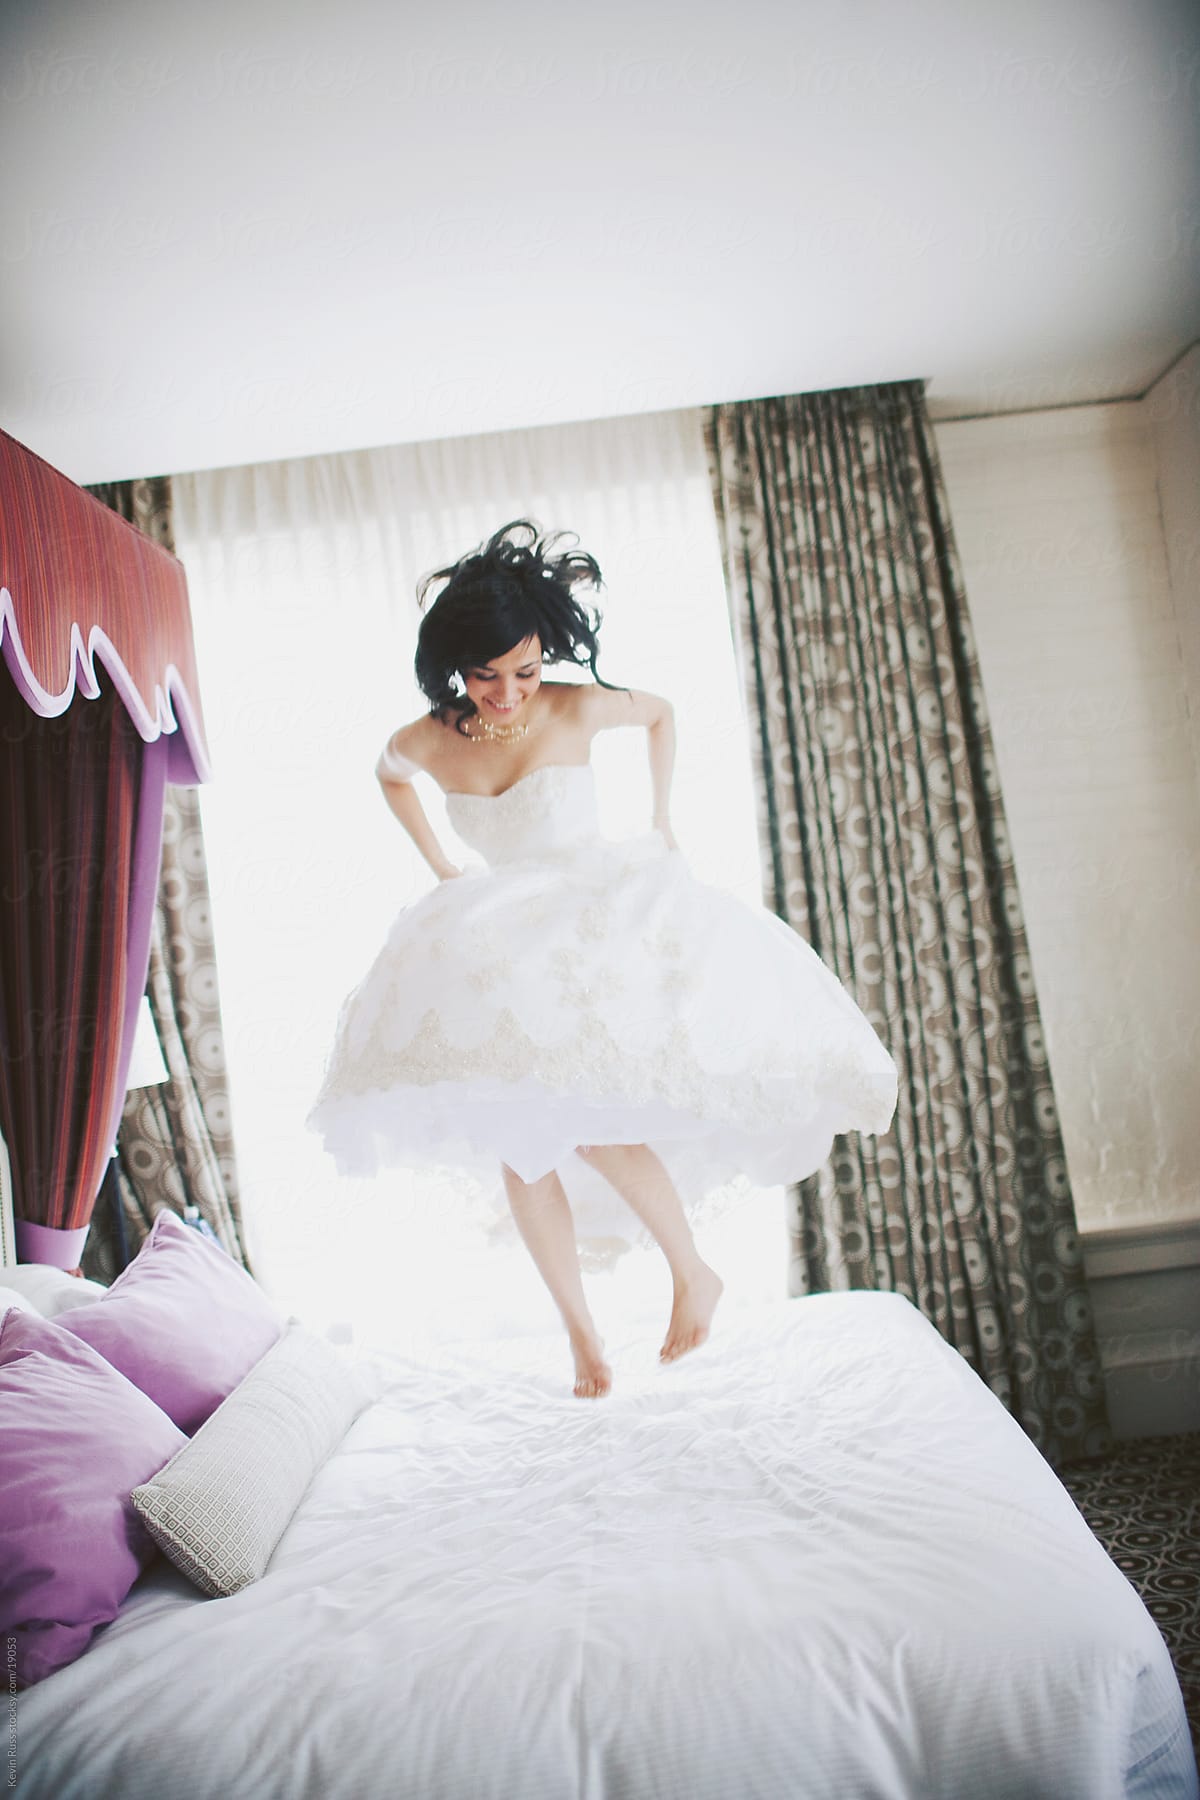 Bed Jumping Bride